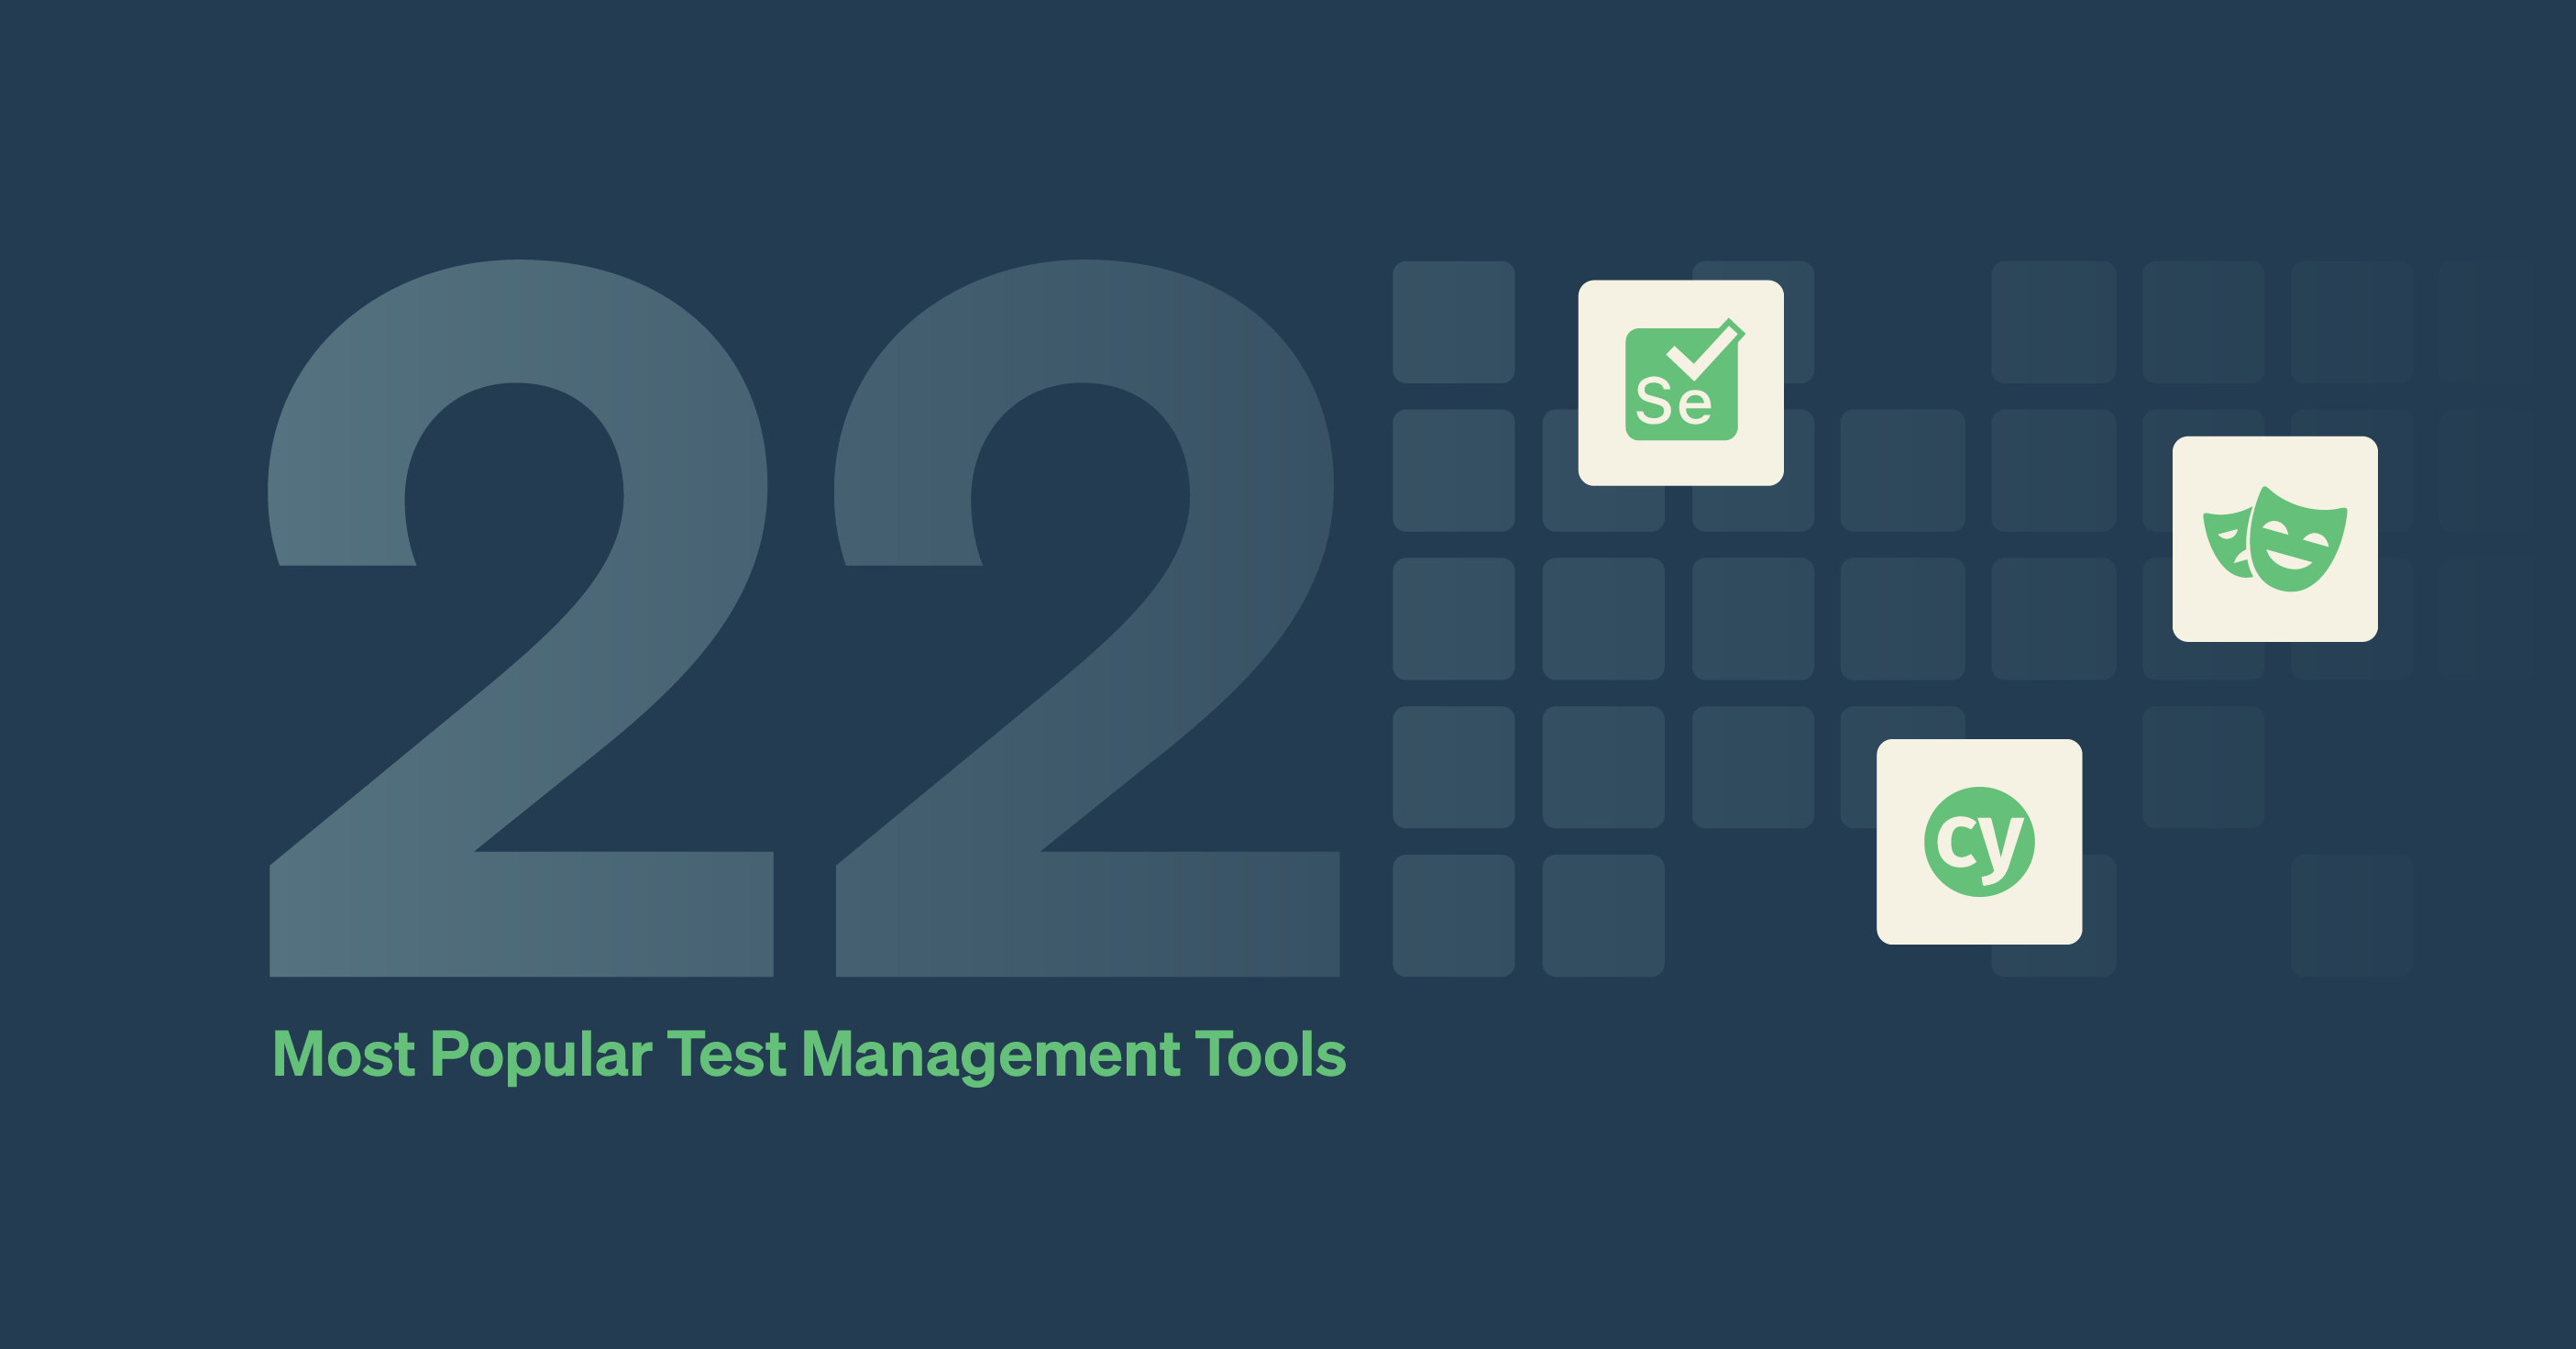 The 22 Most Popular Test Management Tools Worth Considering